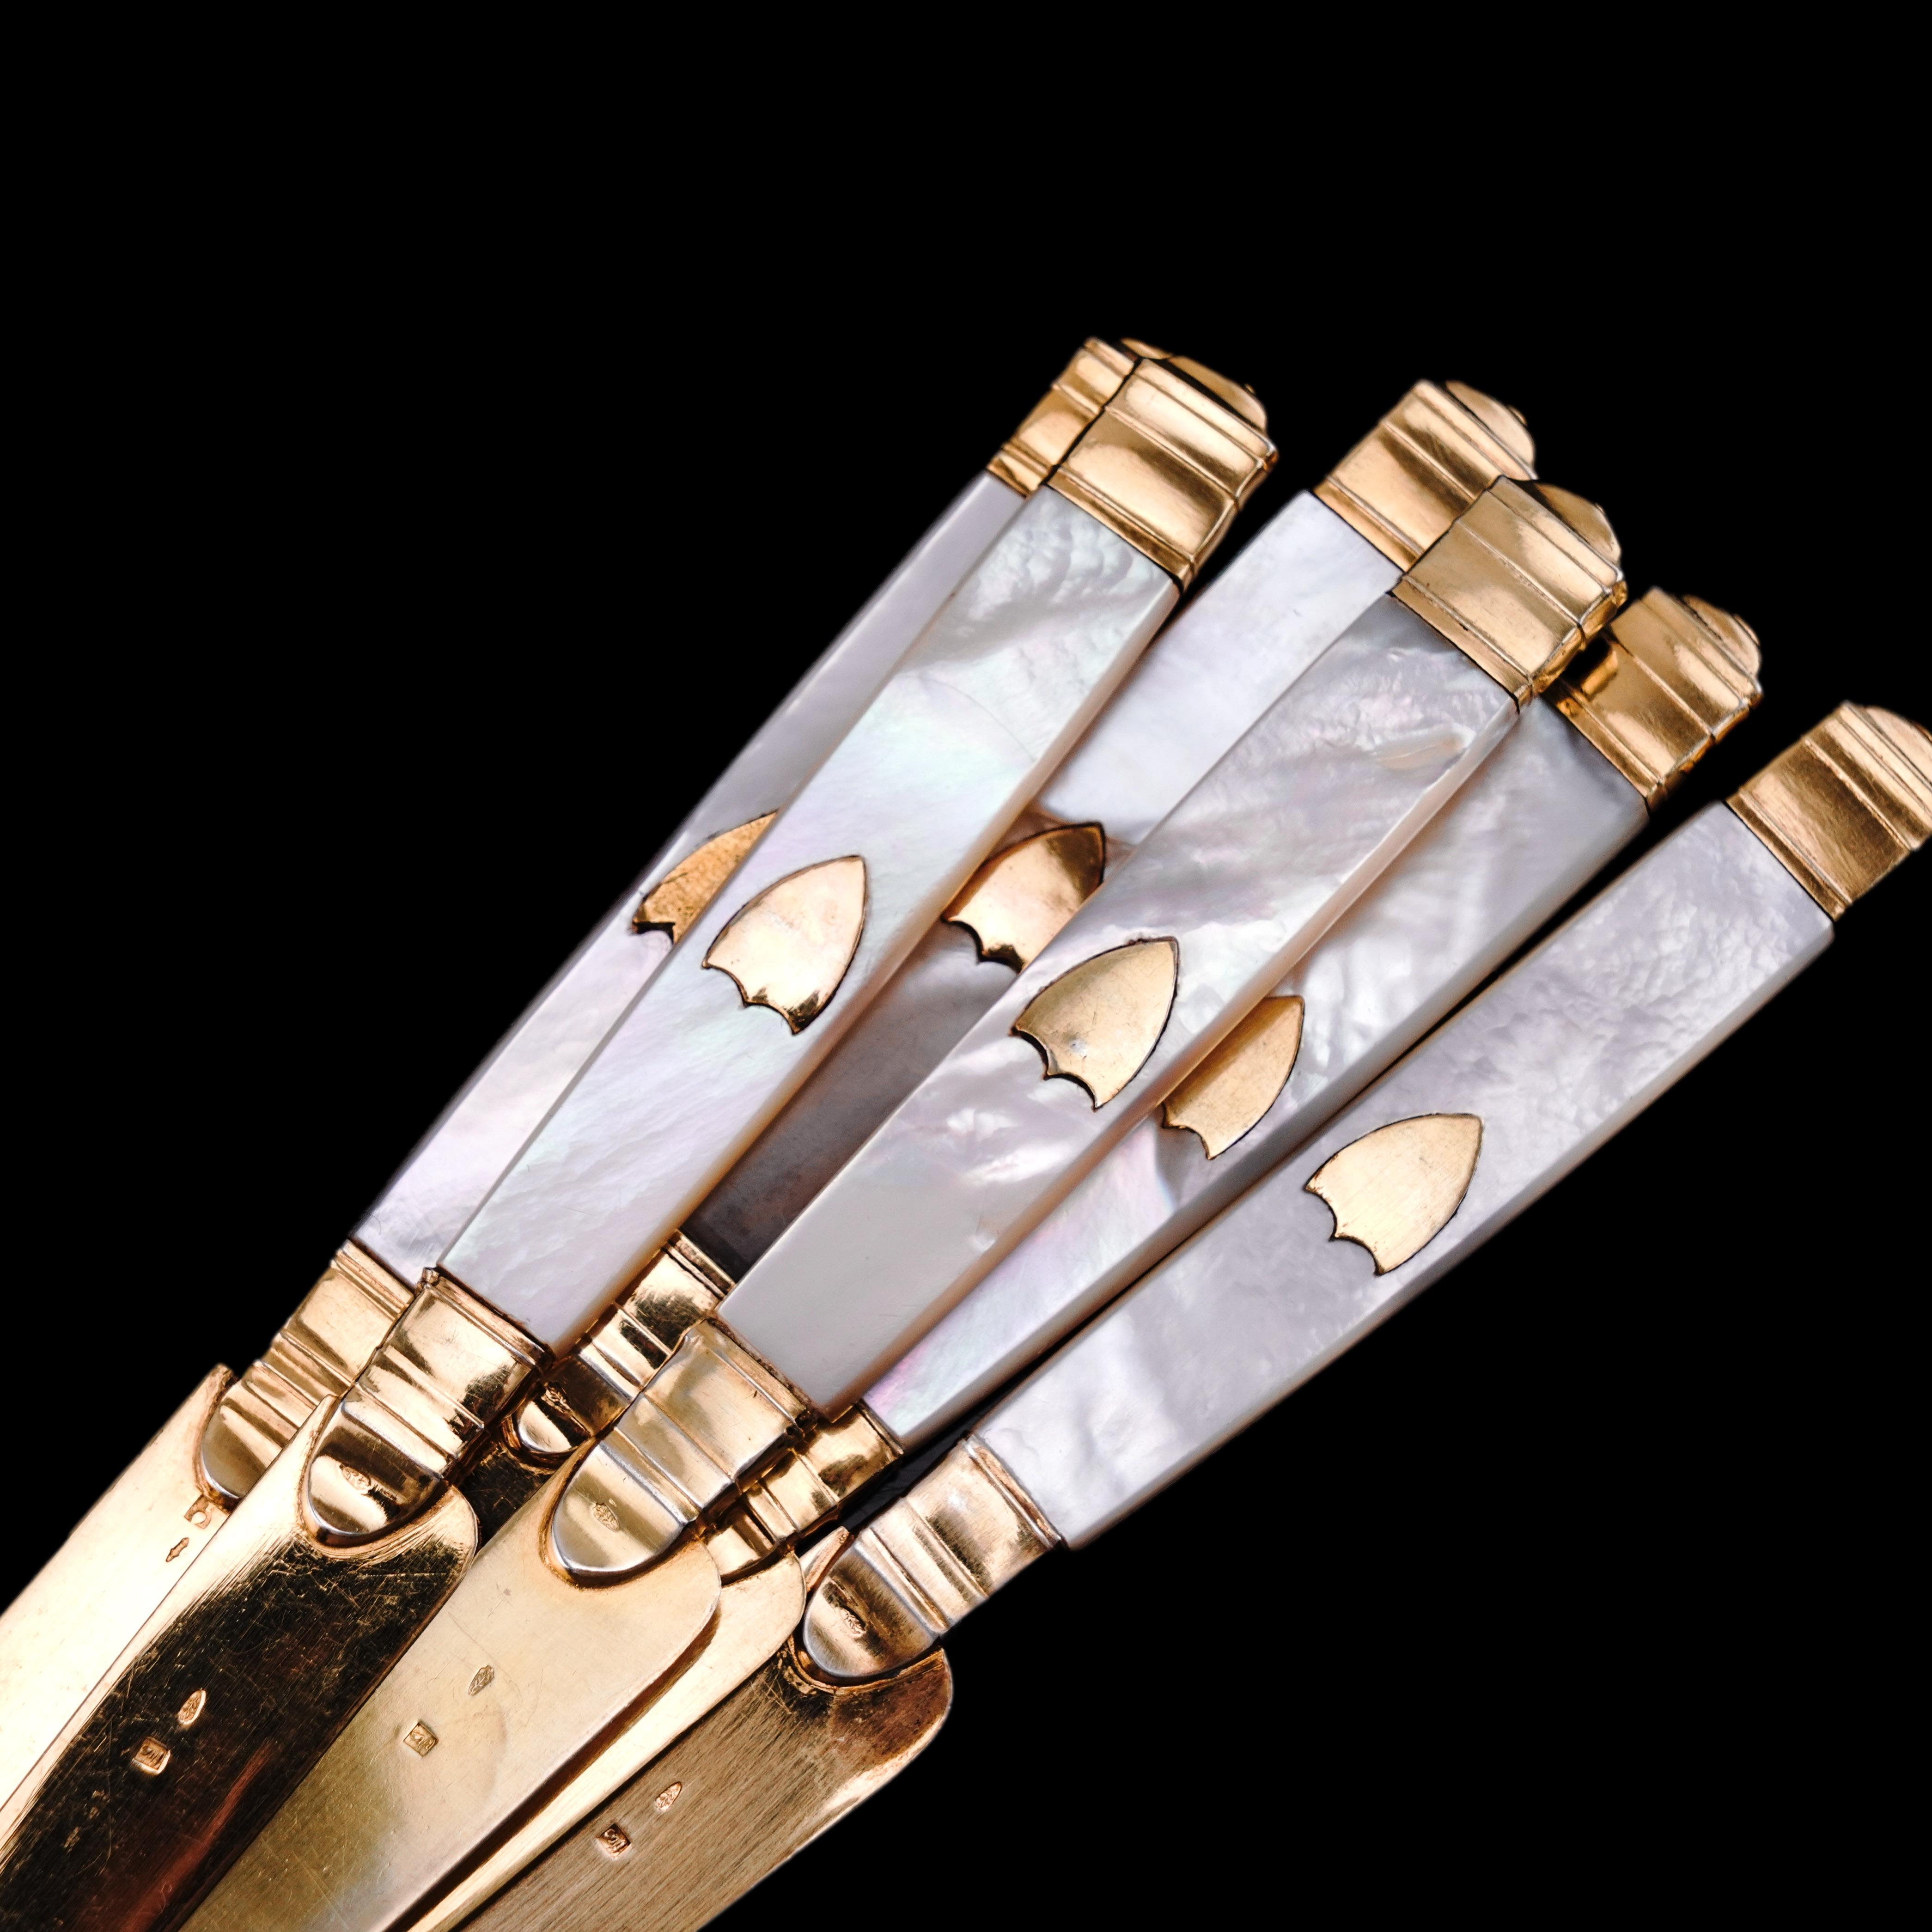 Antique Solid Silver Gilt Mother of Pearl Knives Set of 6 - 19th C. Dutch For Sale 12